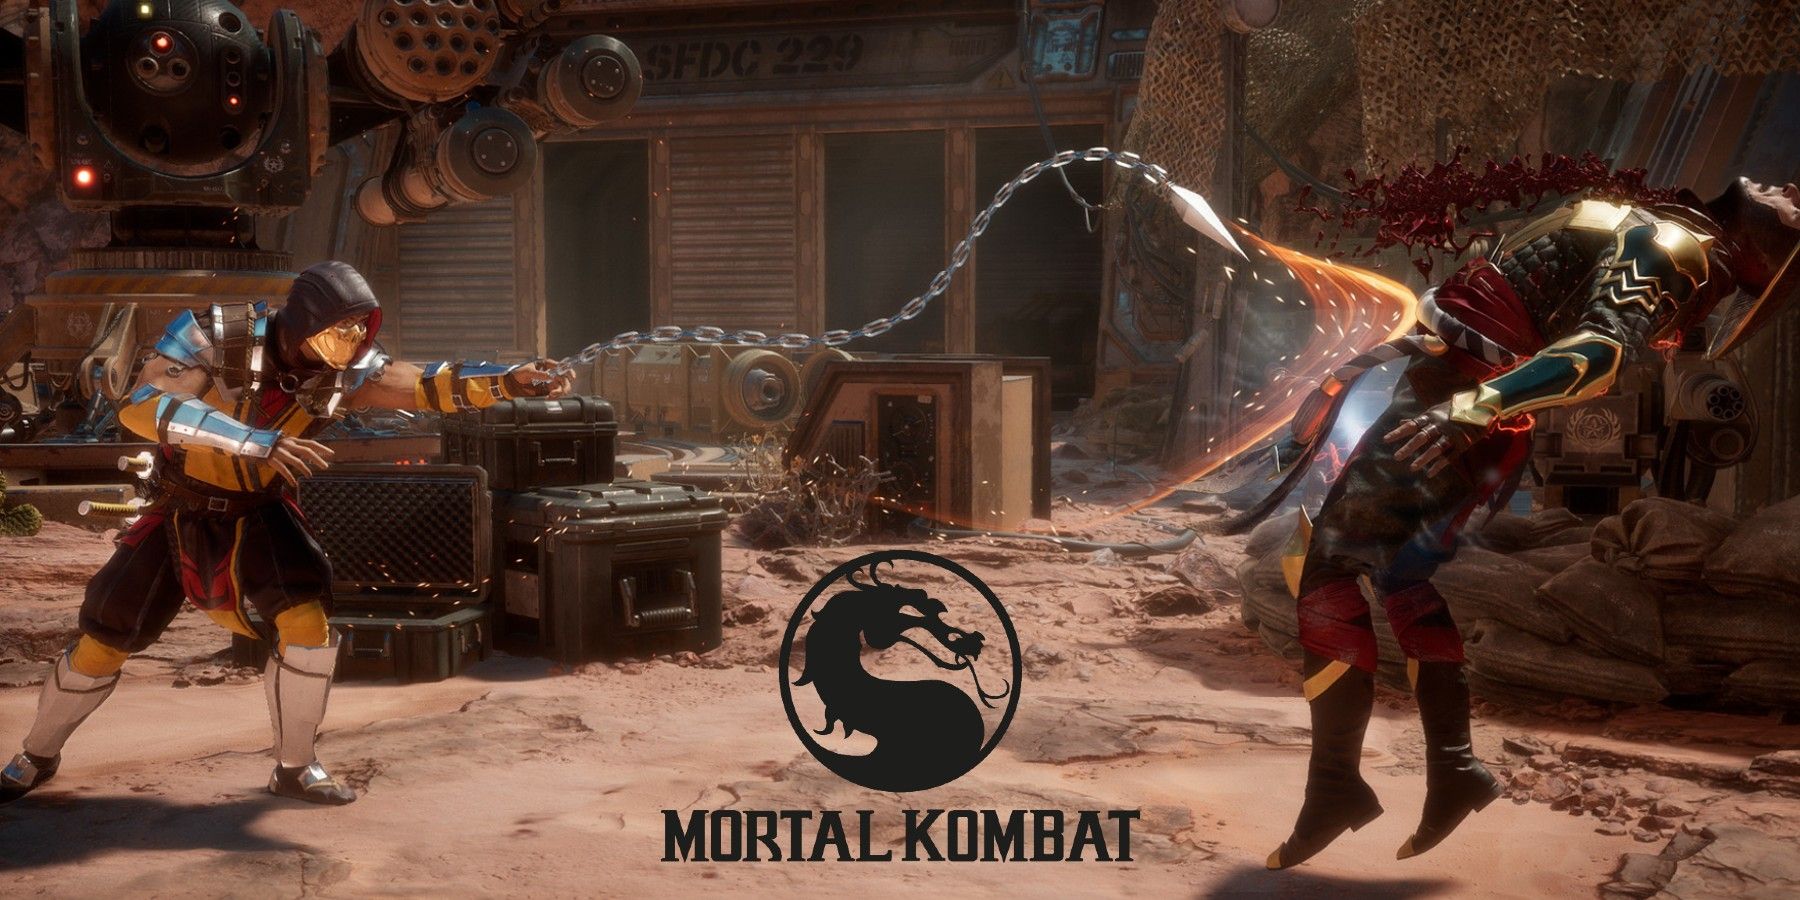 Where Mortal Kombat 12's Story Could Go